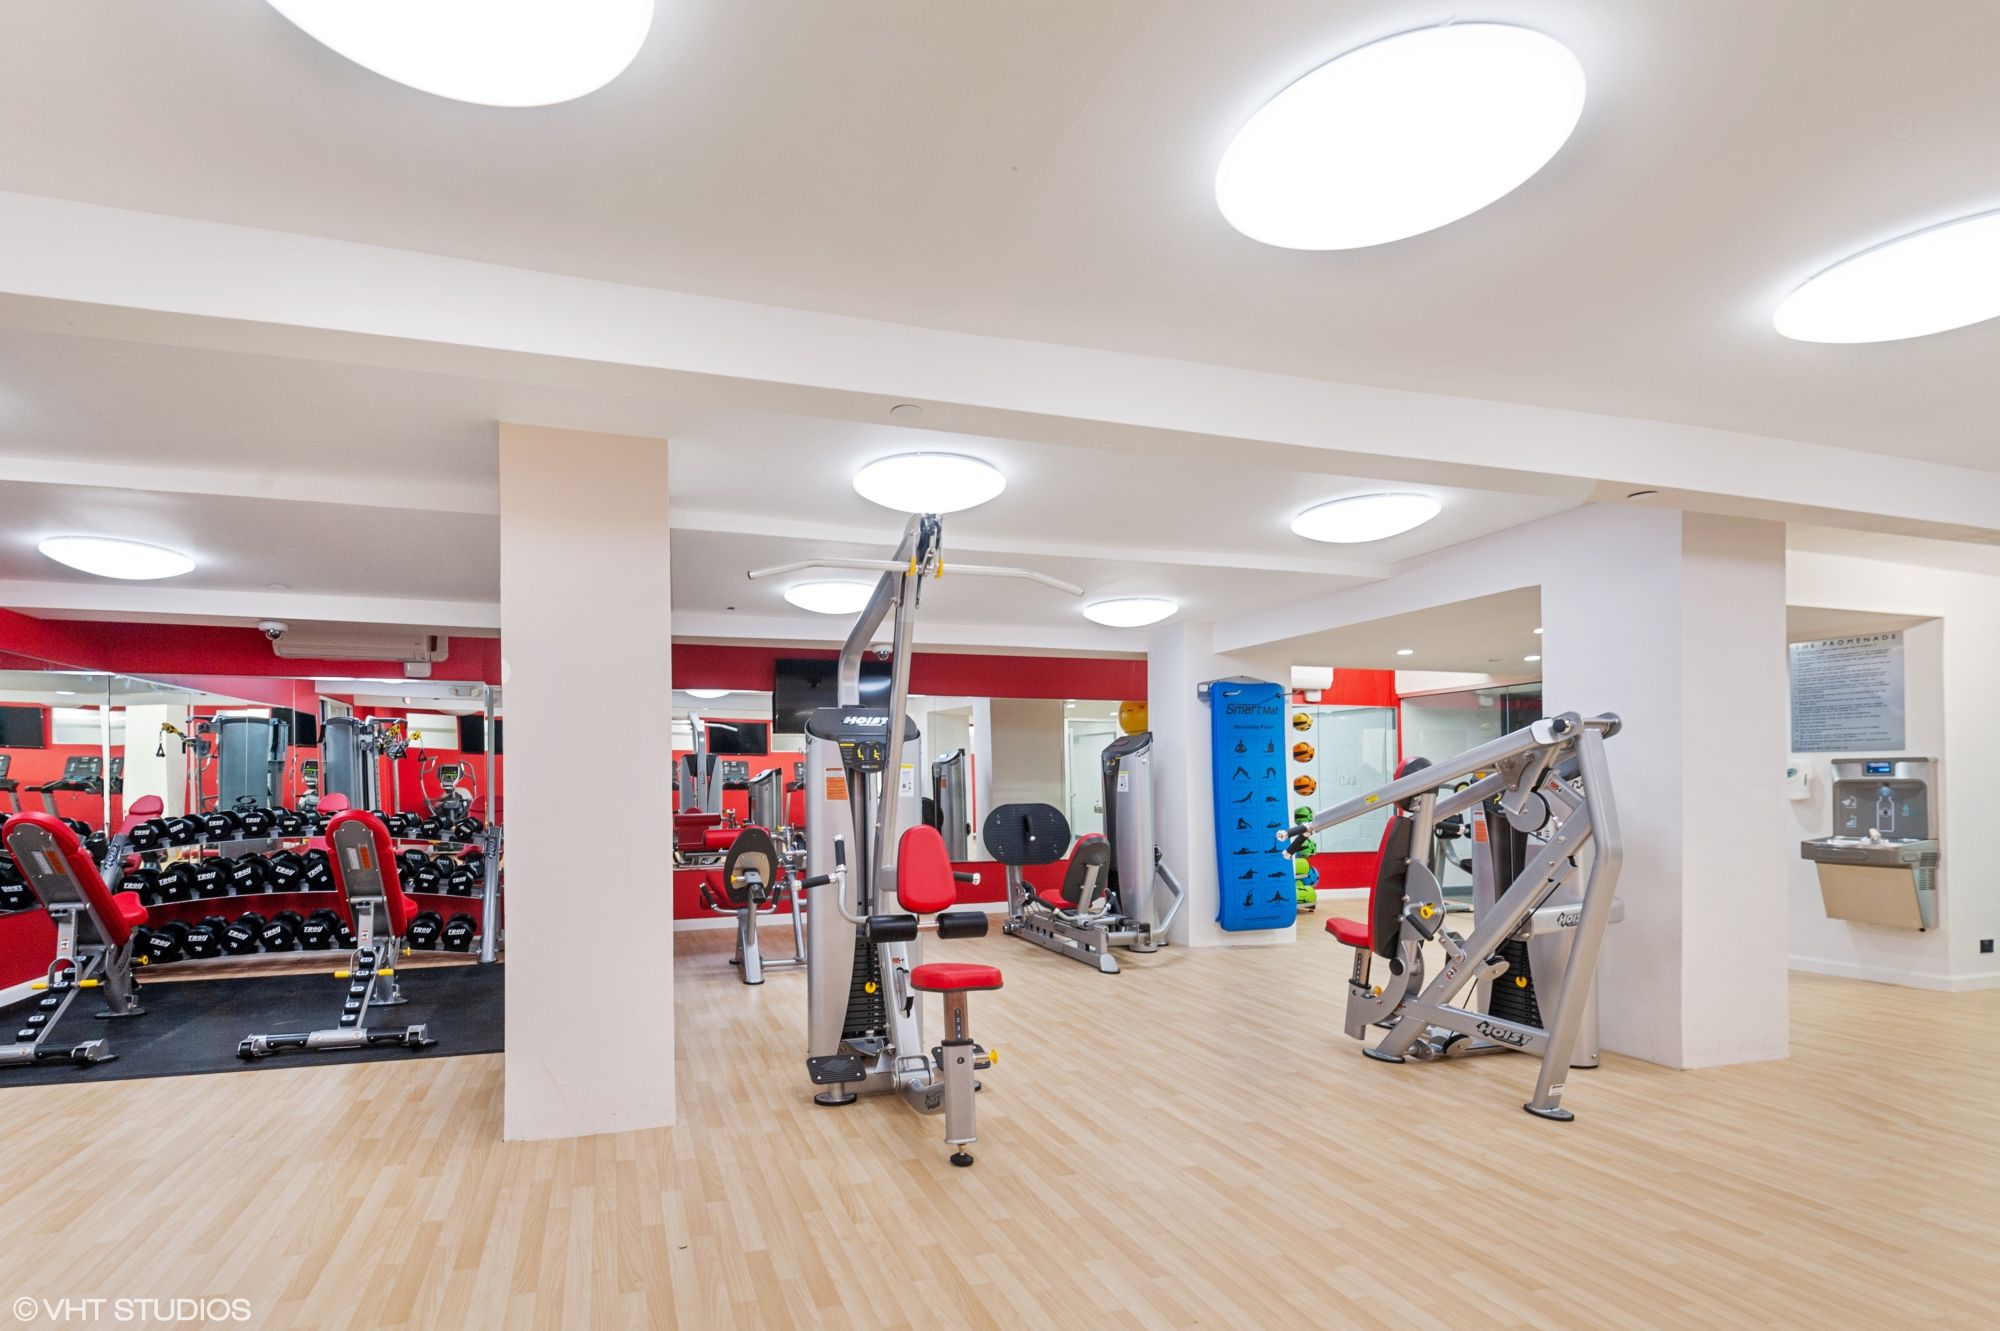 The fitness center at The Promenade, 150 West 225th Street, is newly renovated and has state-of-the-art strength machines & top-of-the-line free weights.